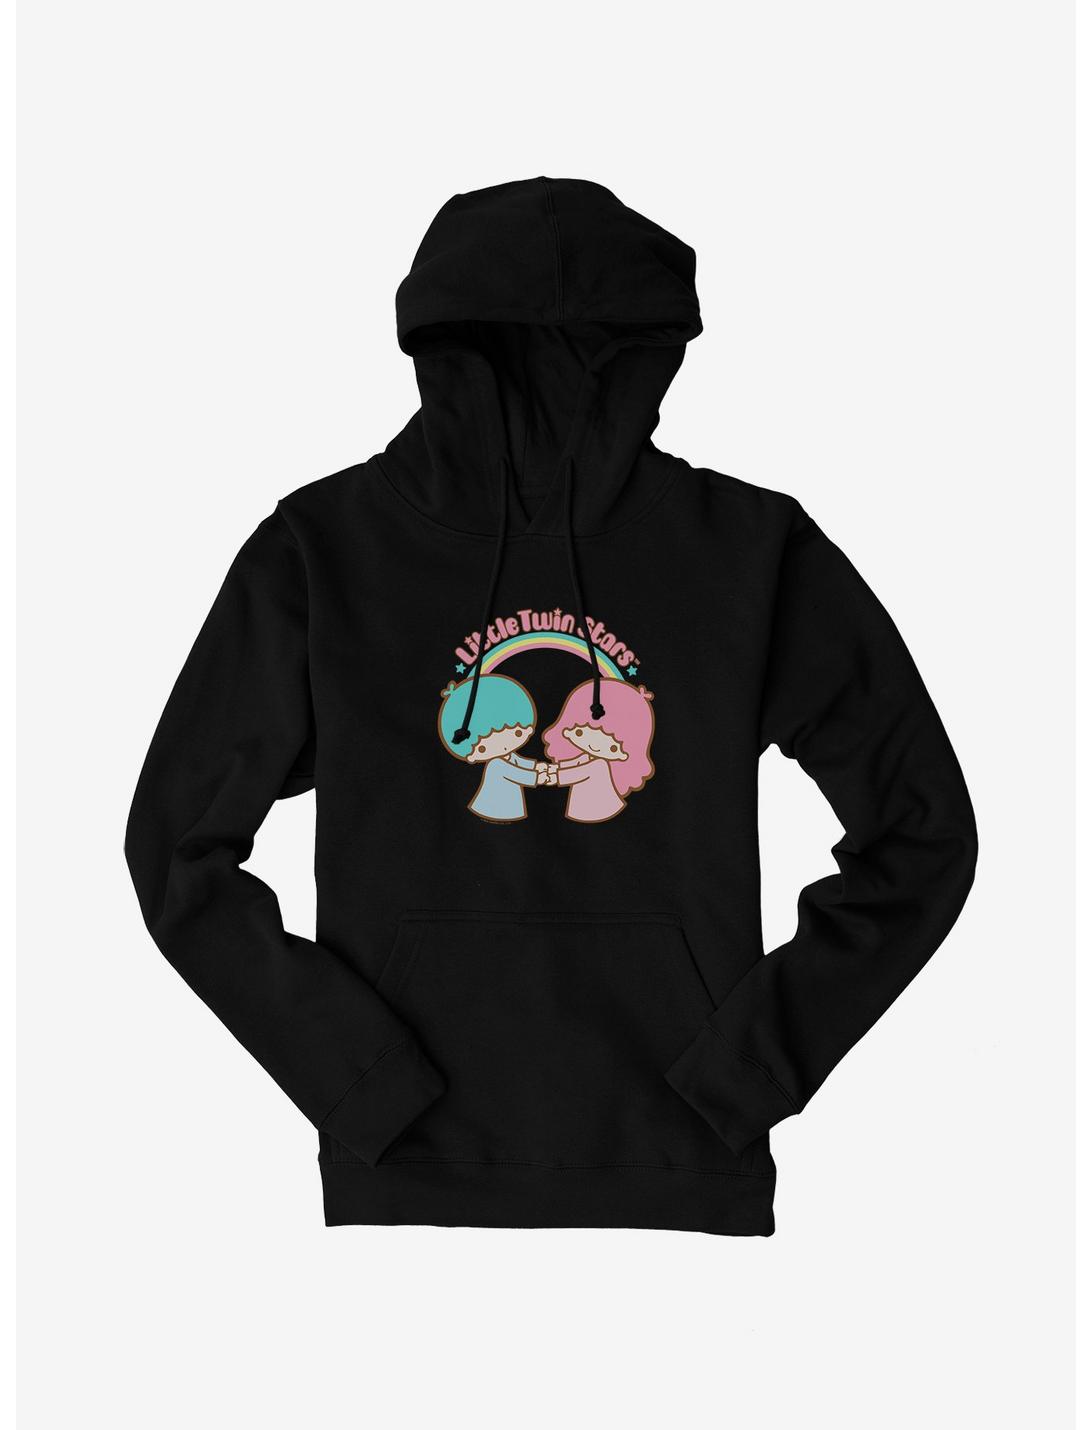 Little Twin Stars Holding Hands Hoodie, , hi-res